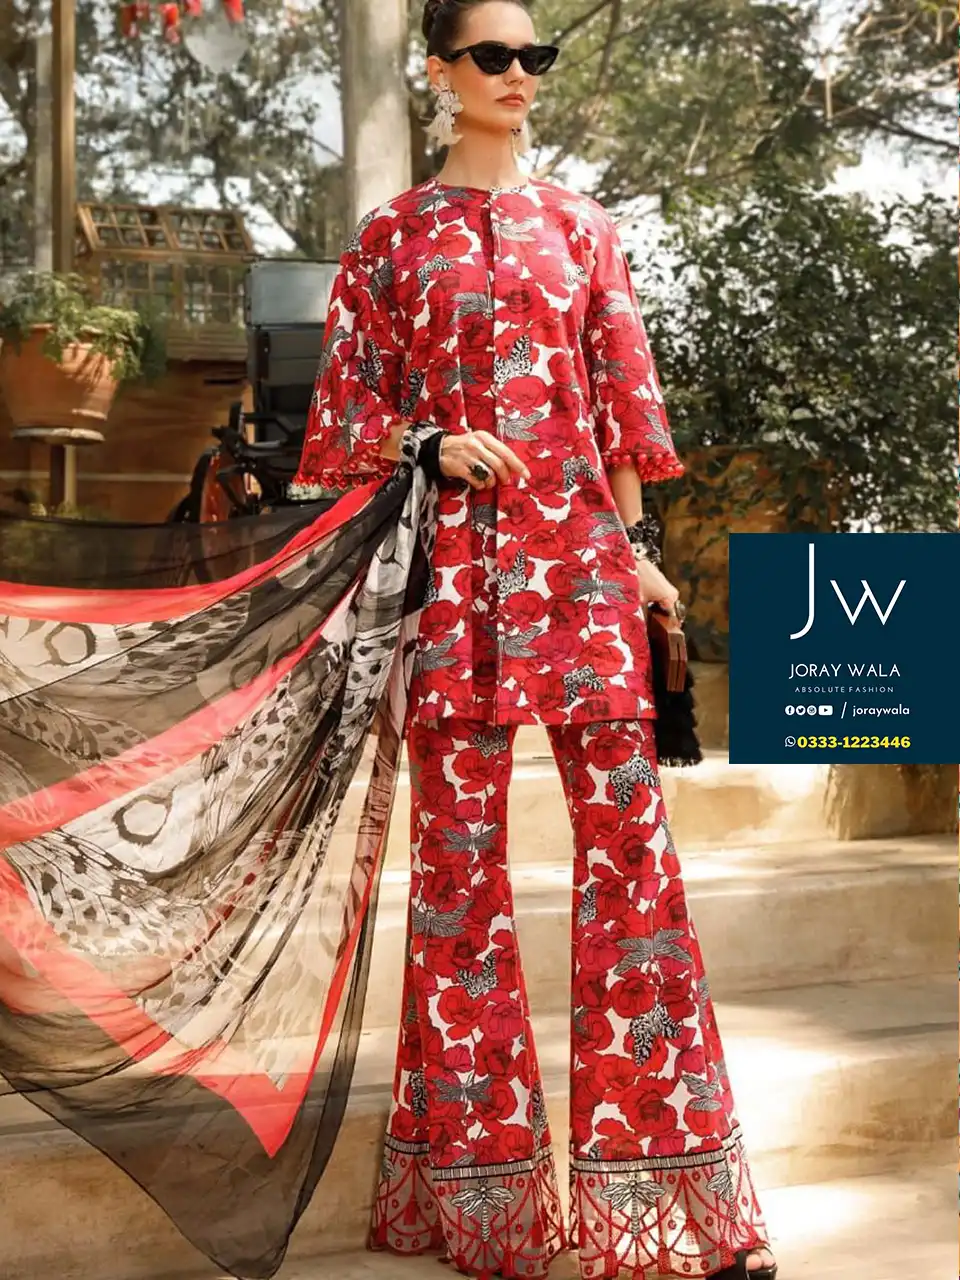 Model wearing Maria b M Print beautiful 3 Pcs lawn suit with floral design, suit has bunch. available at joraywala